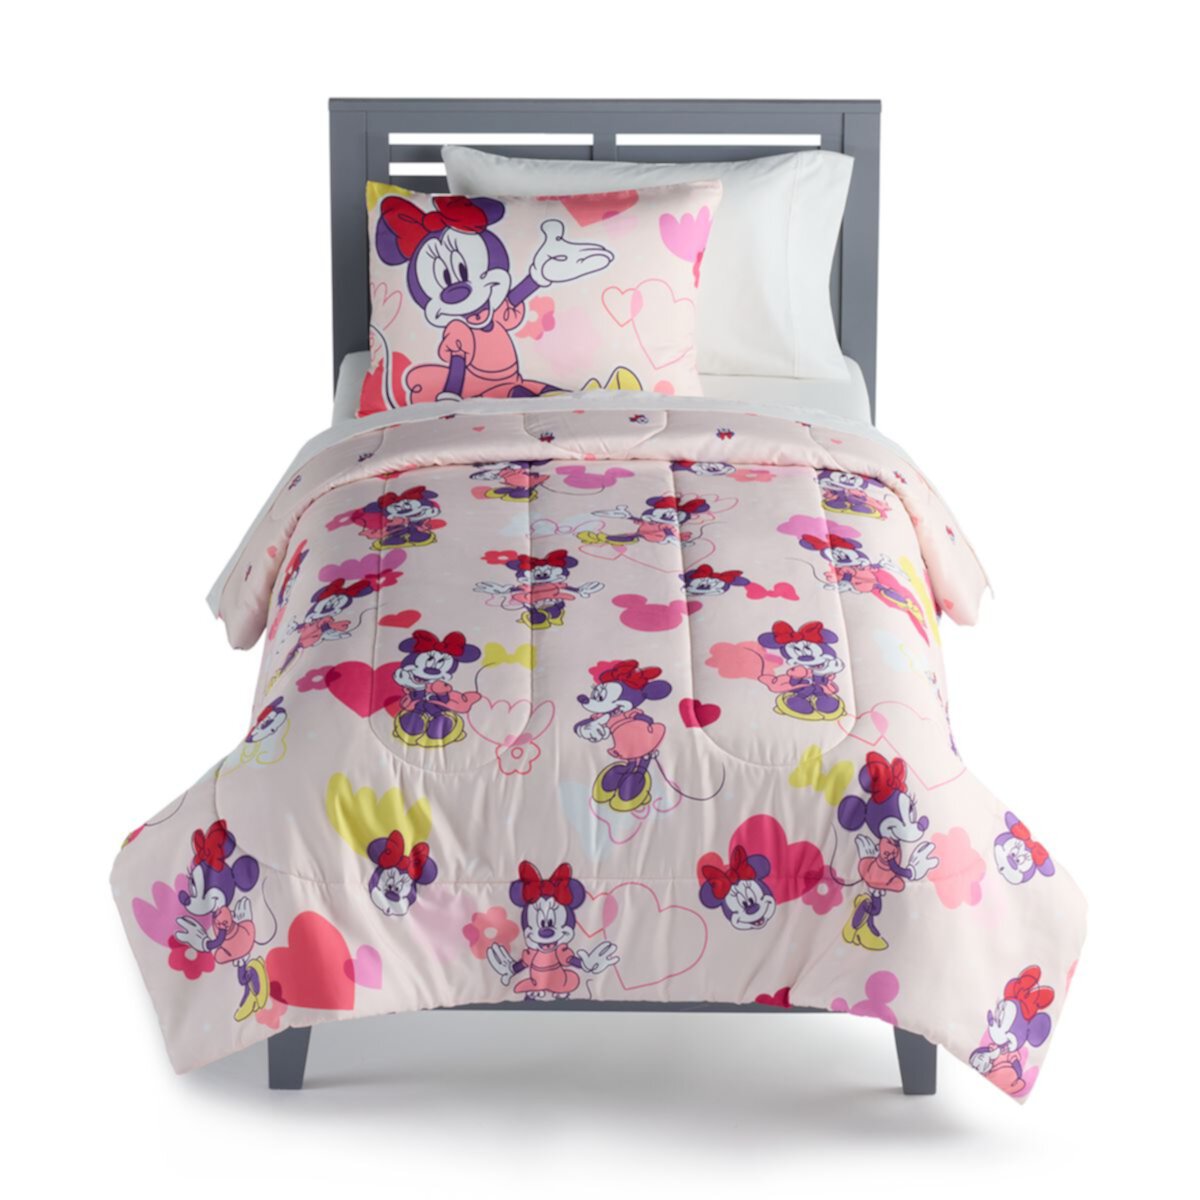 Disney's Minnie Mouse Comforter Set by The Big One® Disney